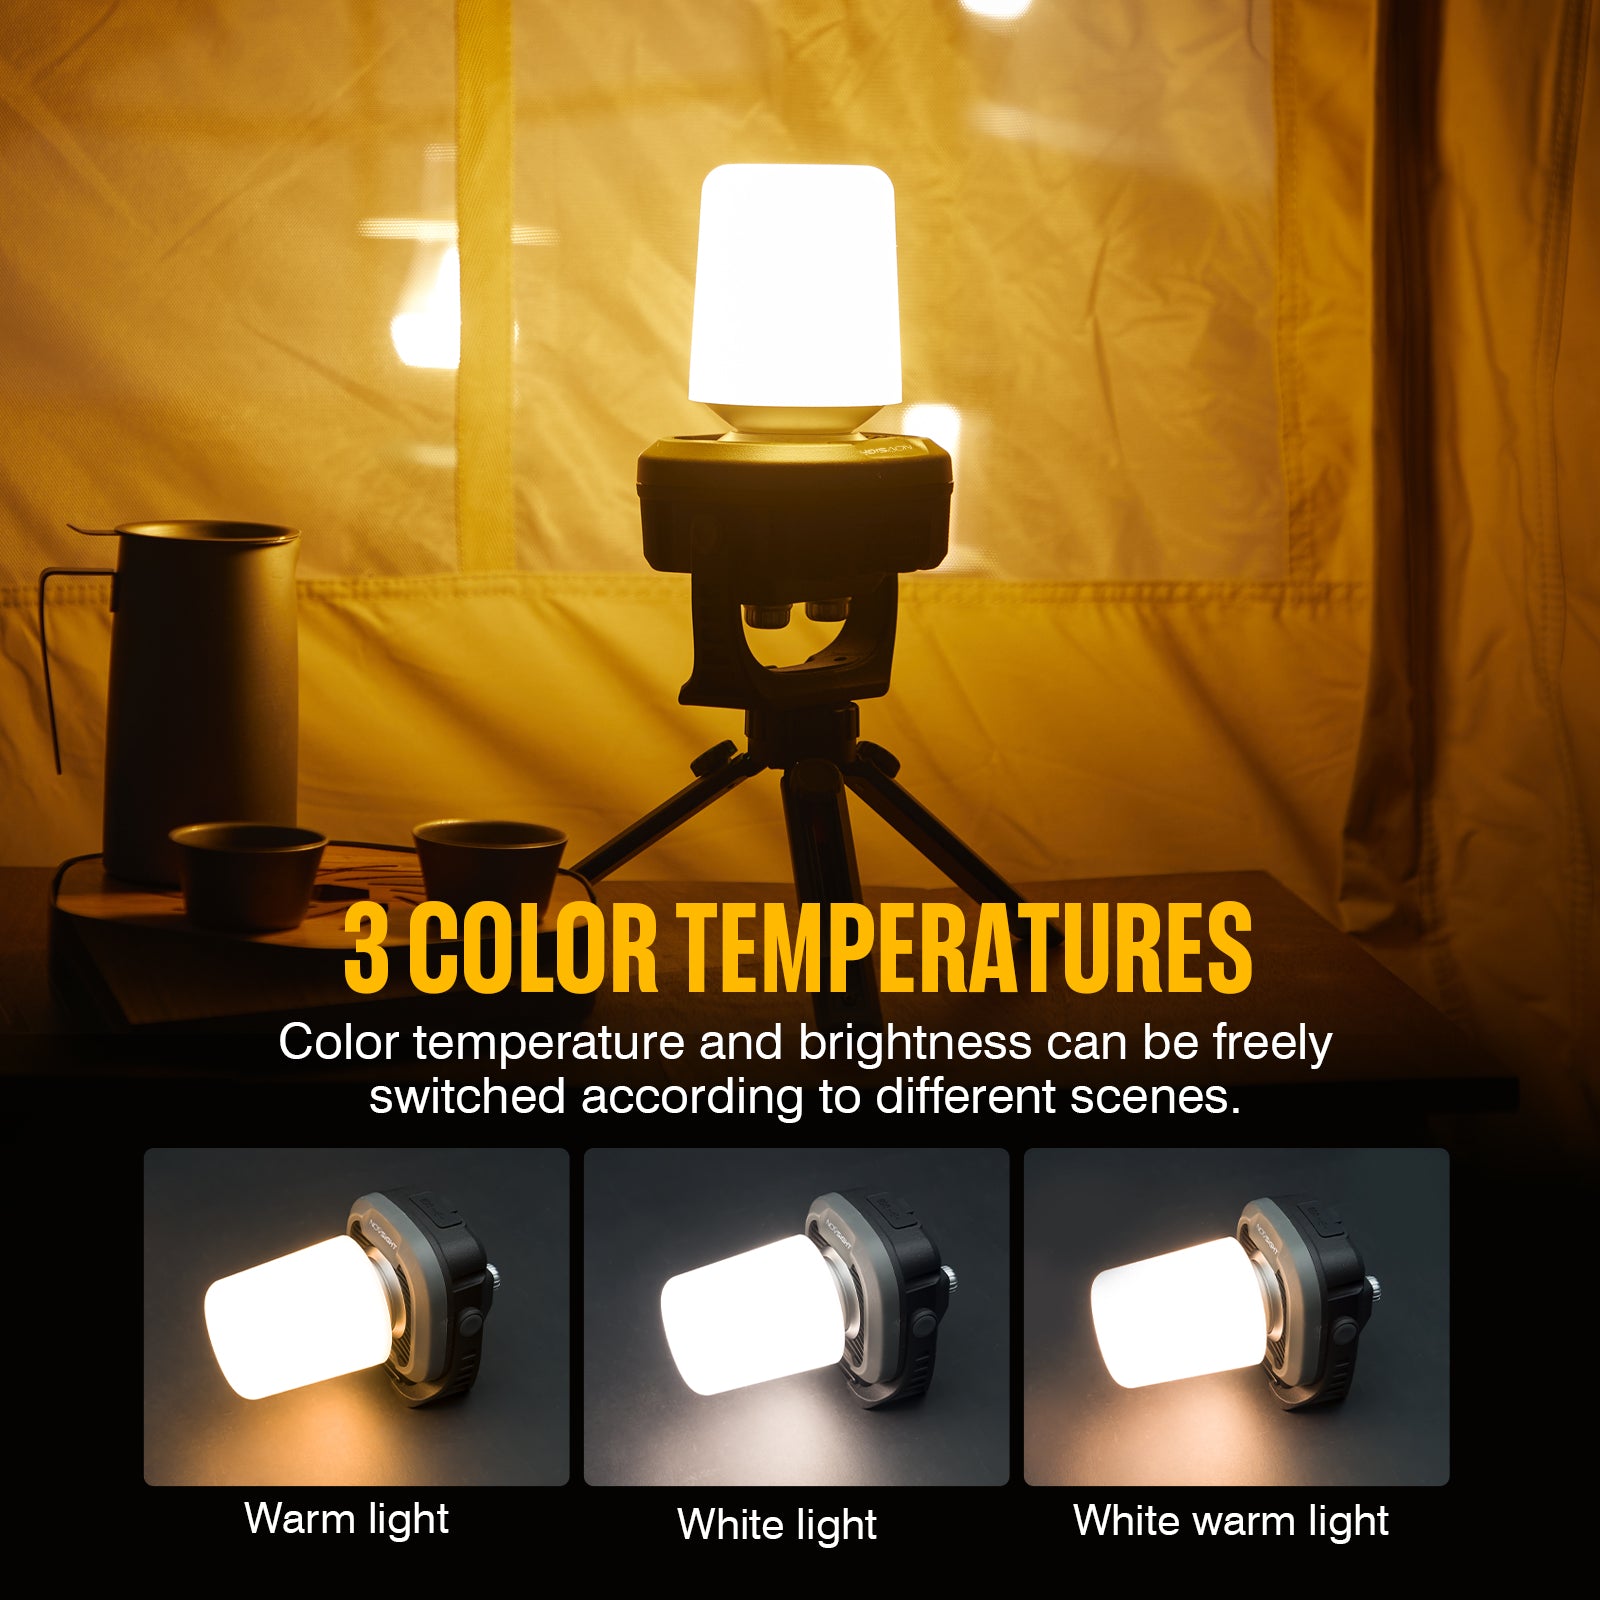 ‎Square LED Rechargeable Magnetic Rotating Work Light Kit with Pothook for Camping Off-road